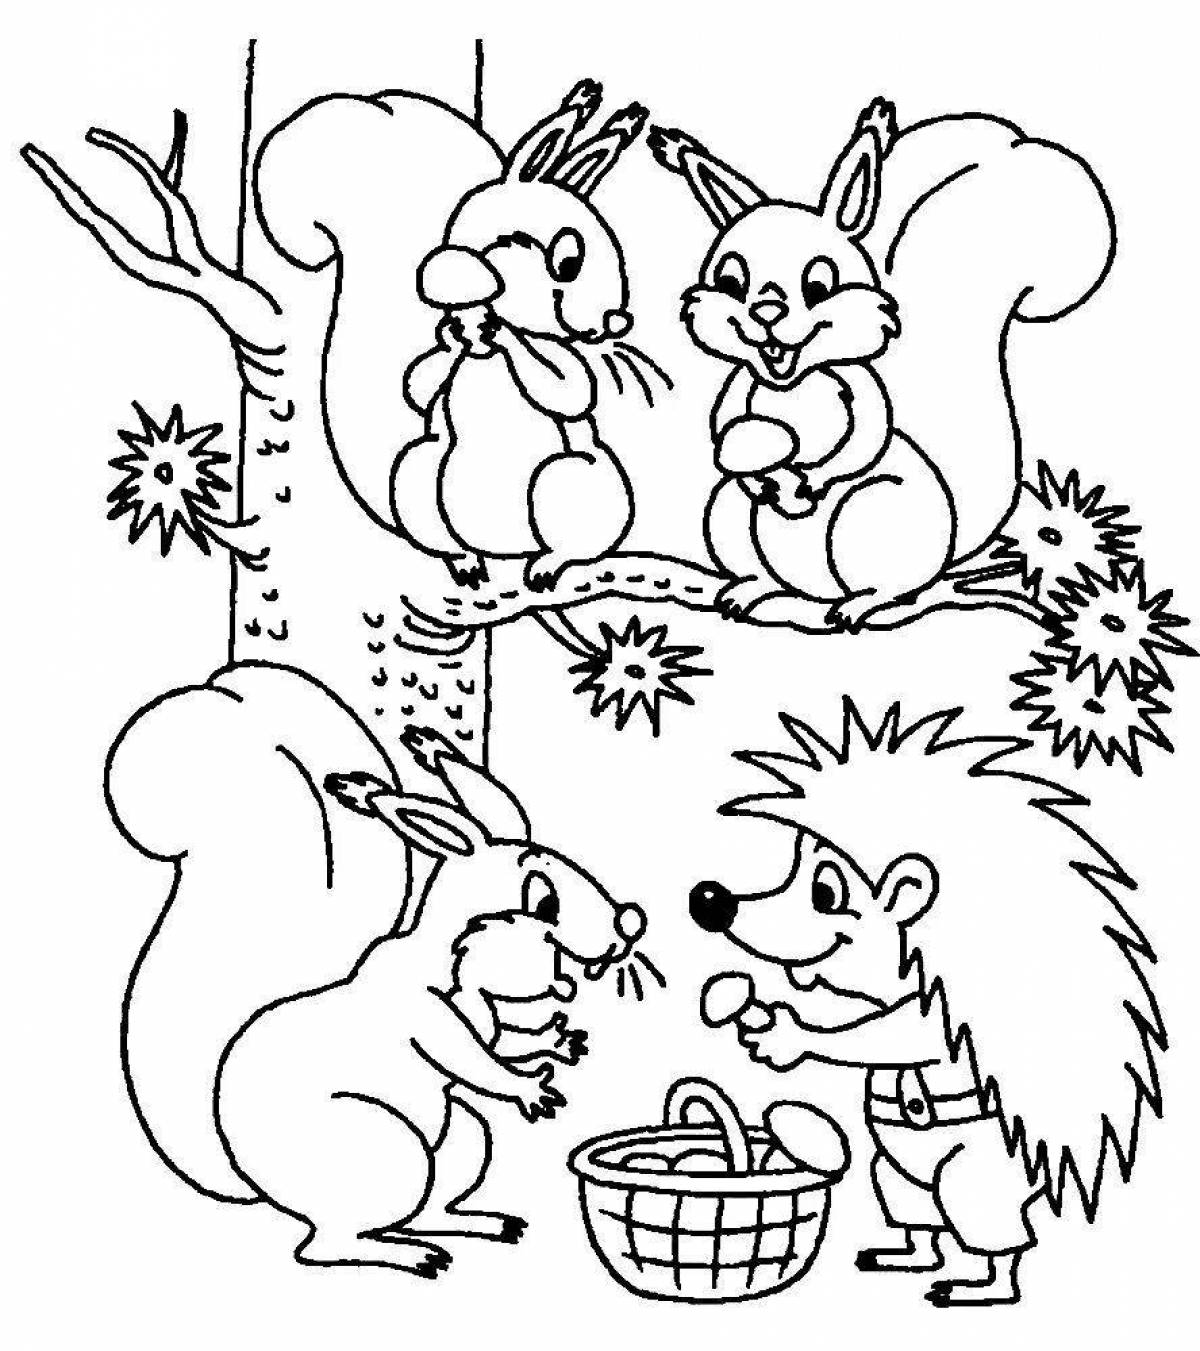 A fun winter animal coloring book for 3-4 year olds